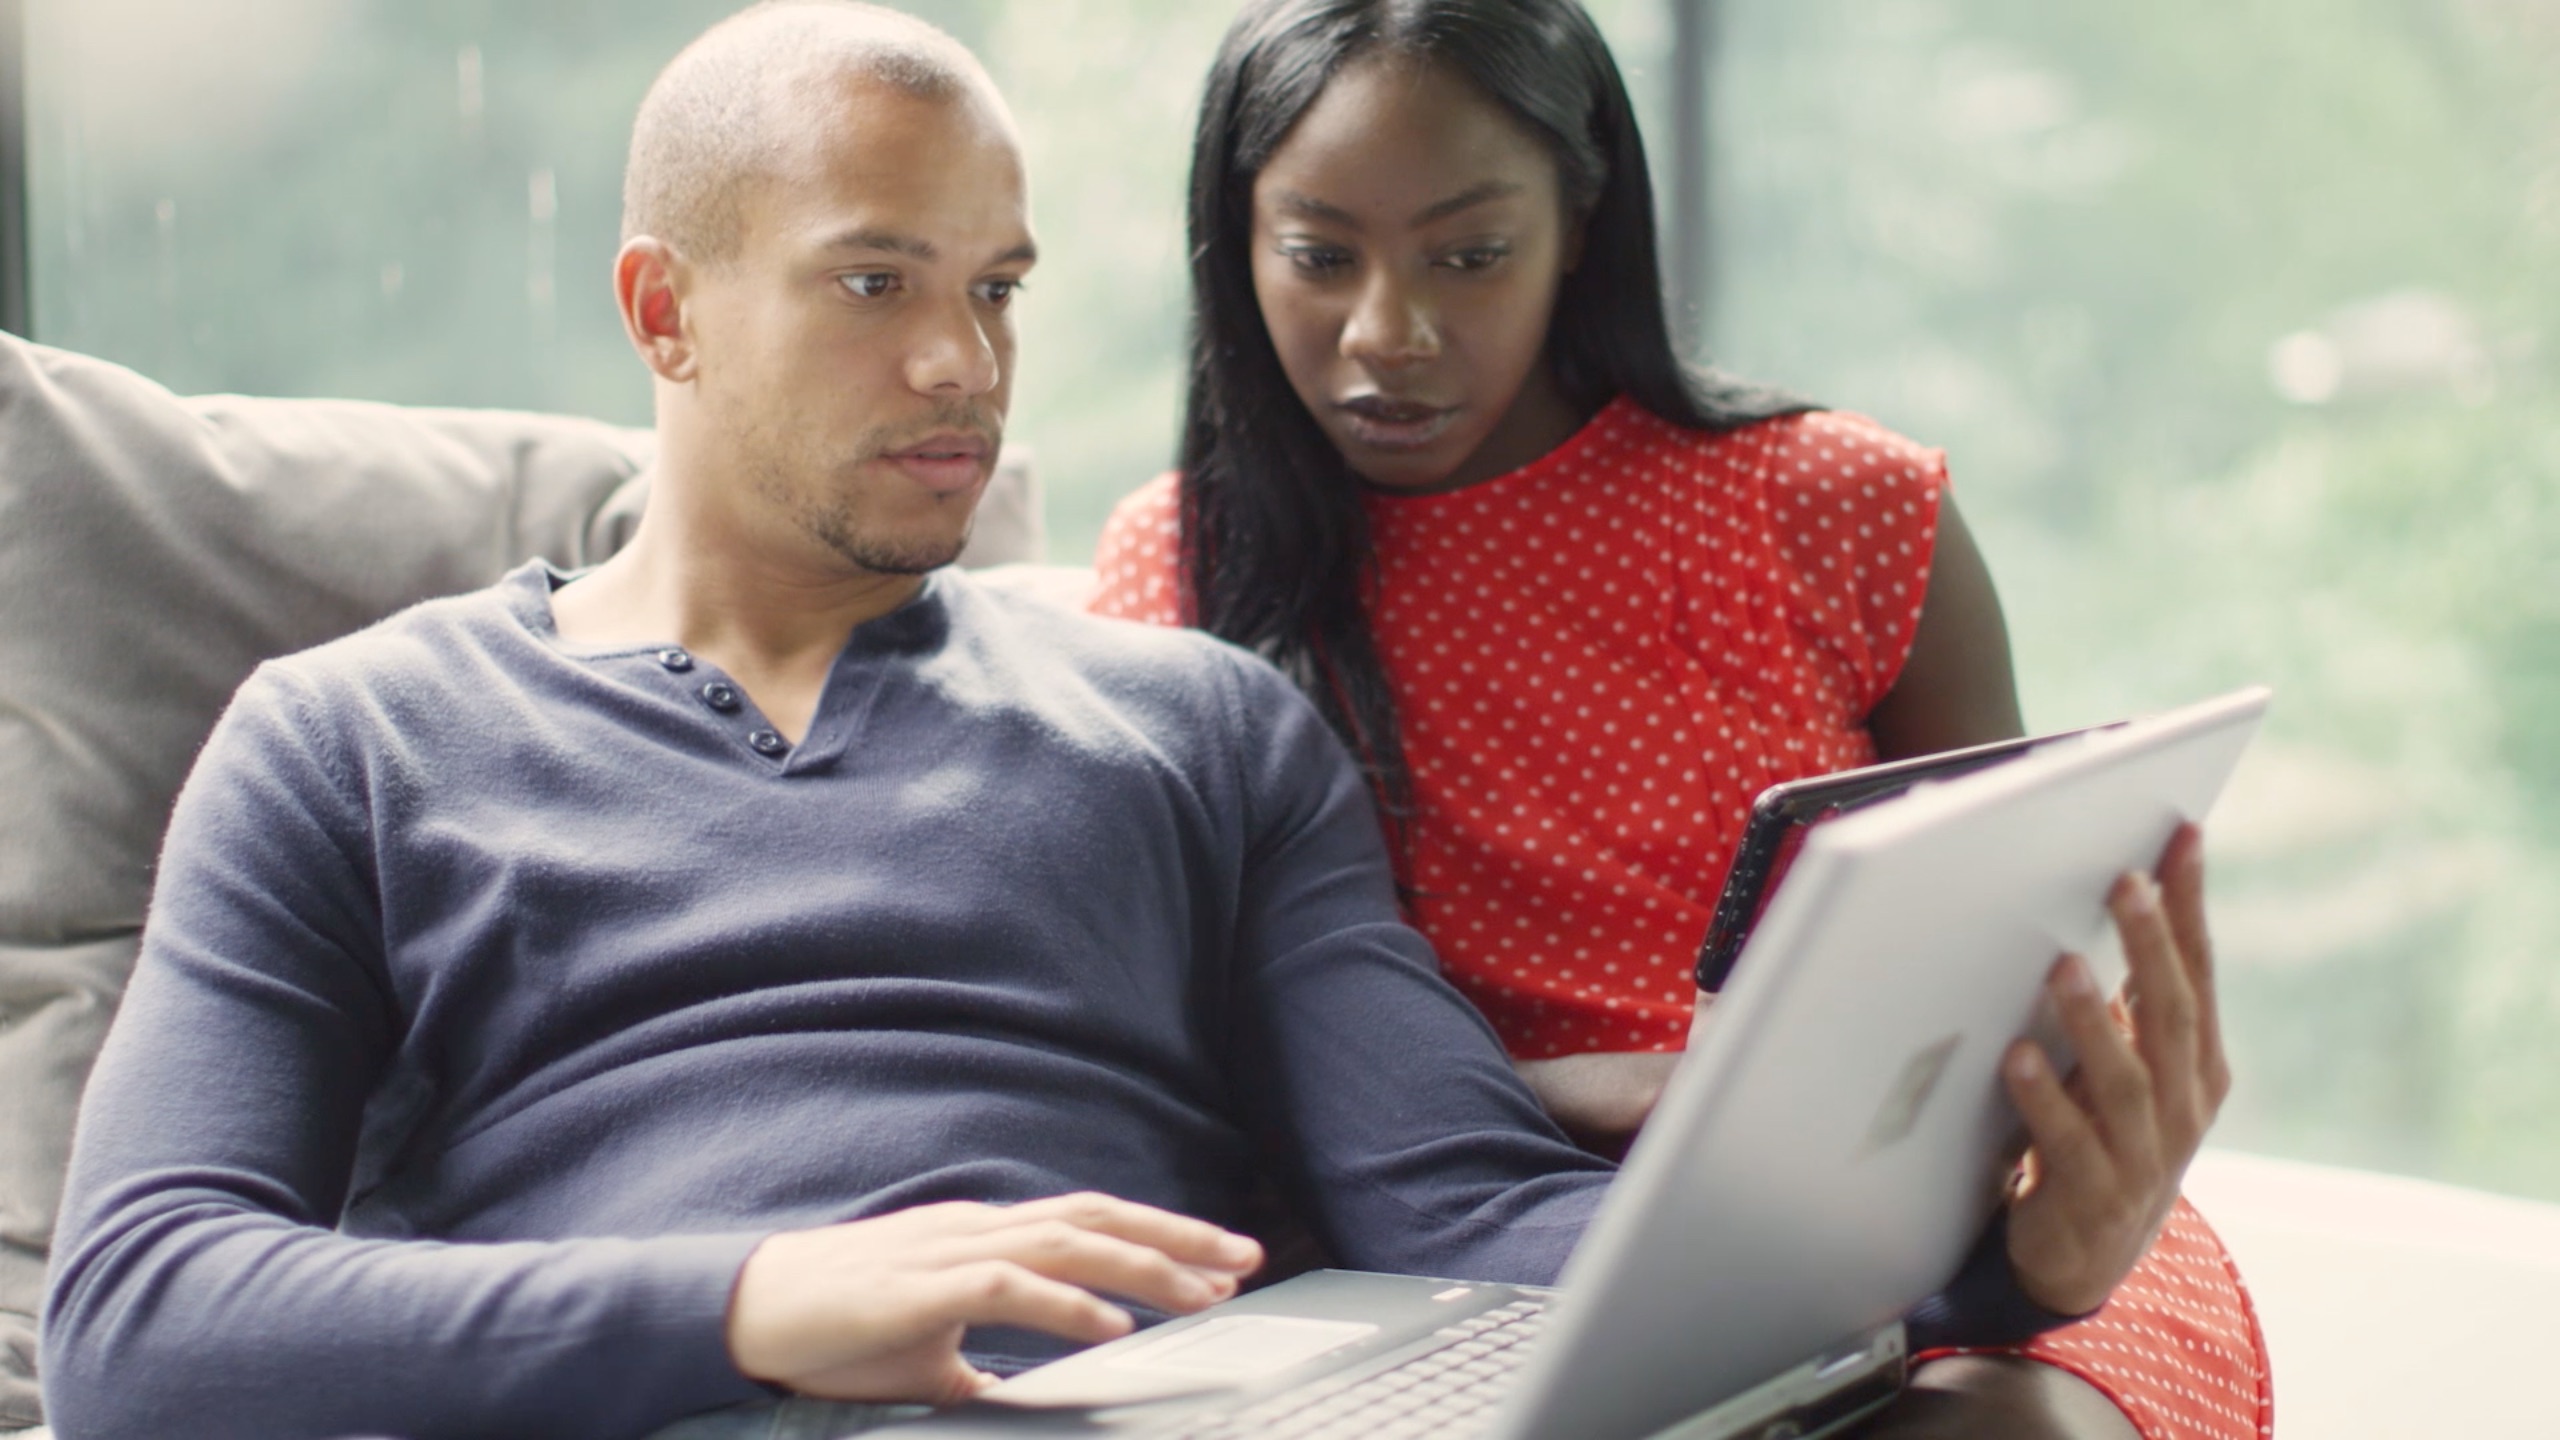 A man and woman sitting on a couch looking at a laptop.